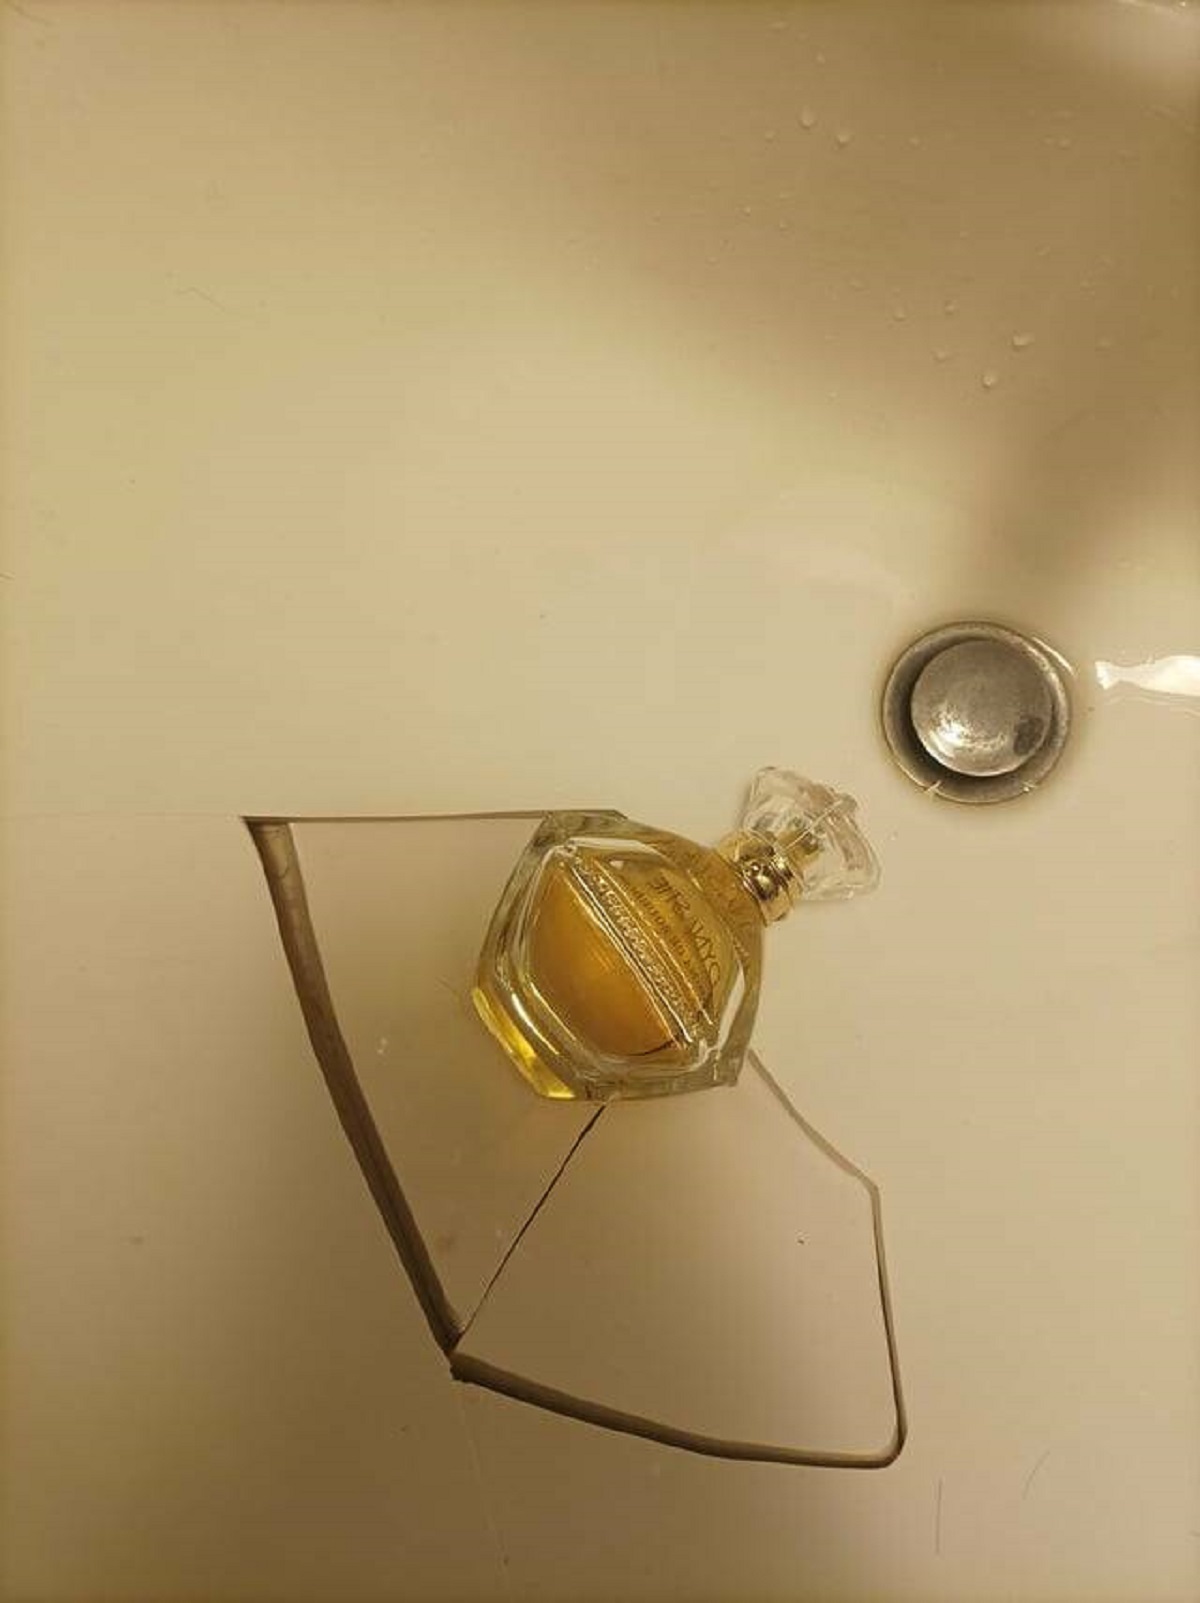 "My cat knocked a perfume bottle off the shelf which broke the sink"